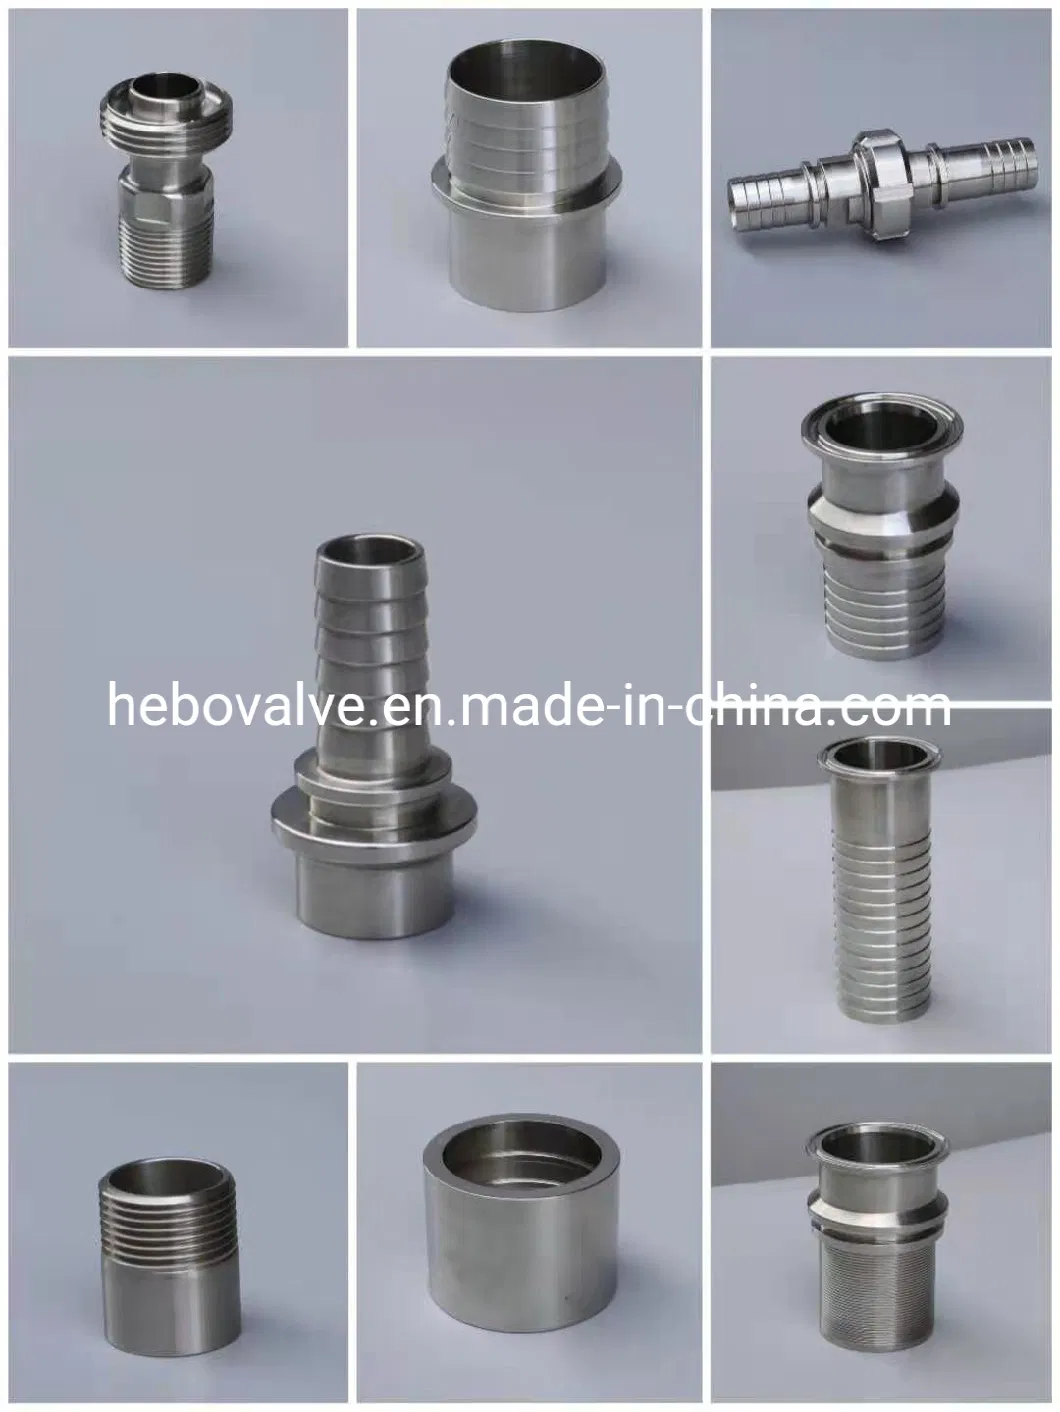 3A Sanitary Stainless Steel Pipe Fitting Hose Adapter